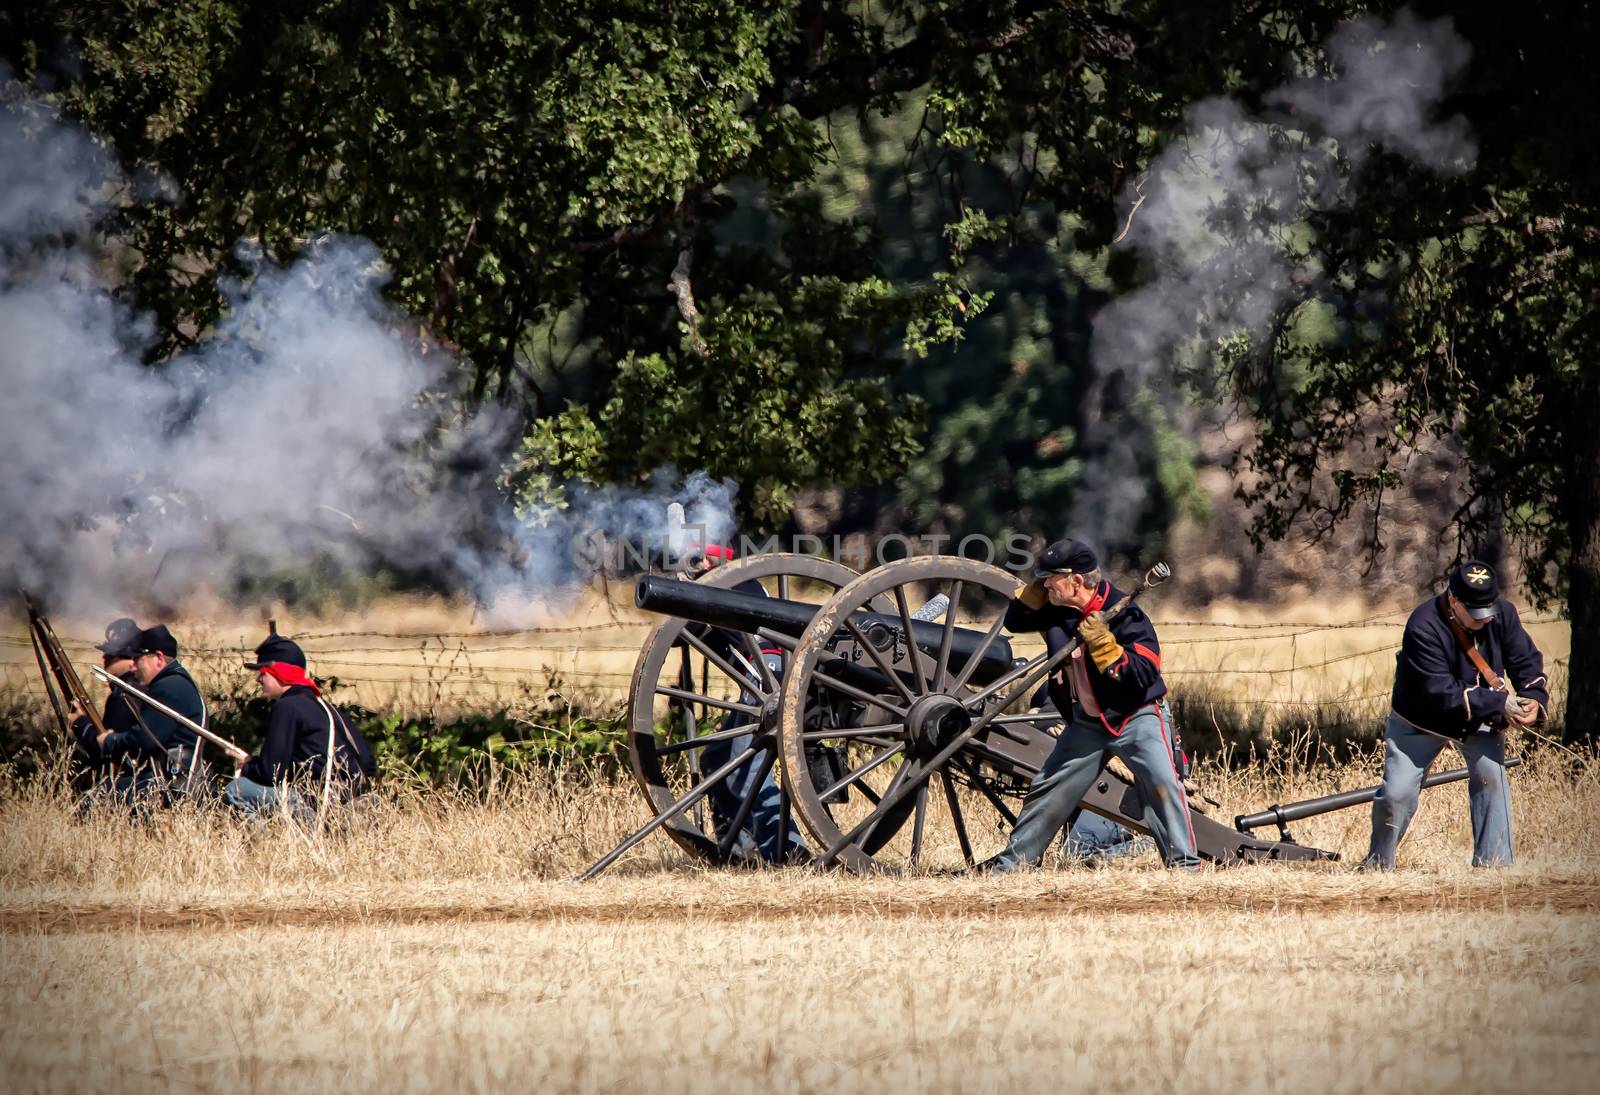 A Union cannon battery stands ready for action during a Civil War Reenactment at Anderson, California.
Photo taken on: September 27th, 2014